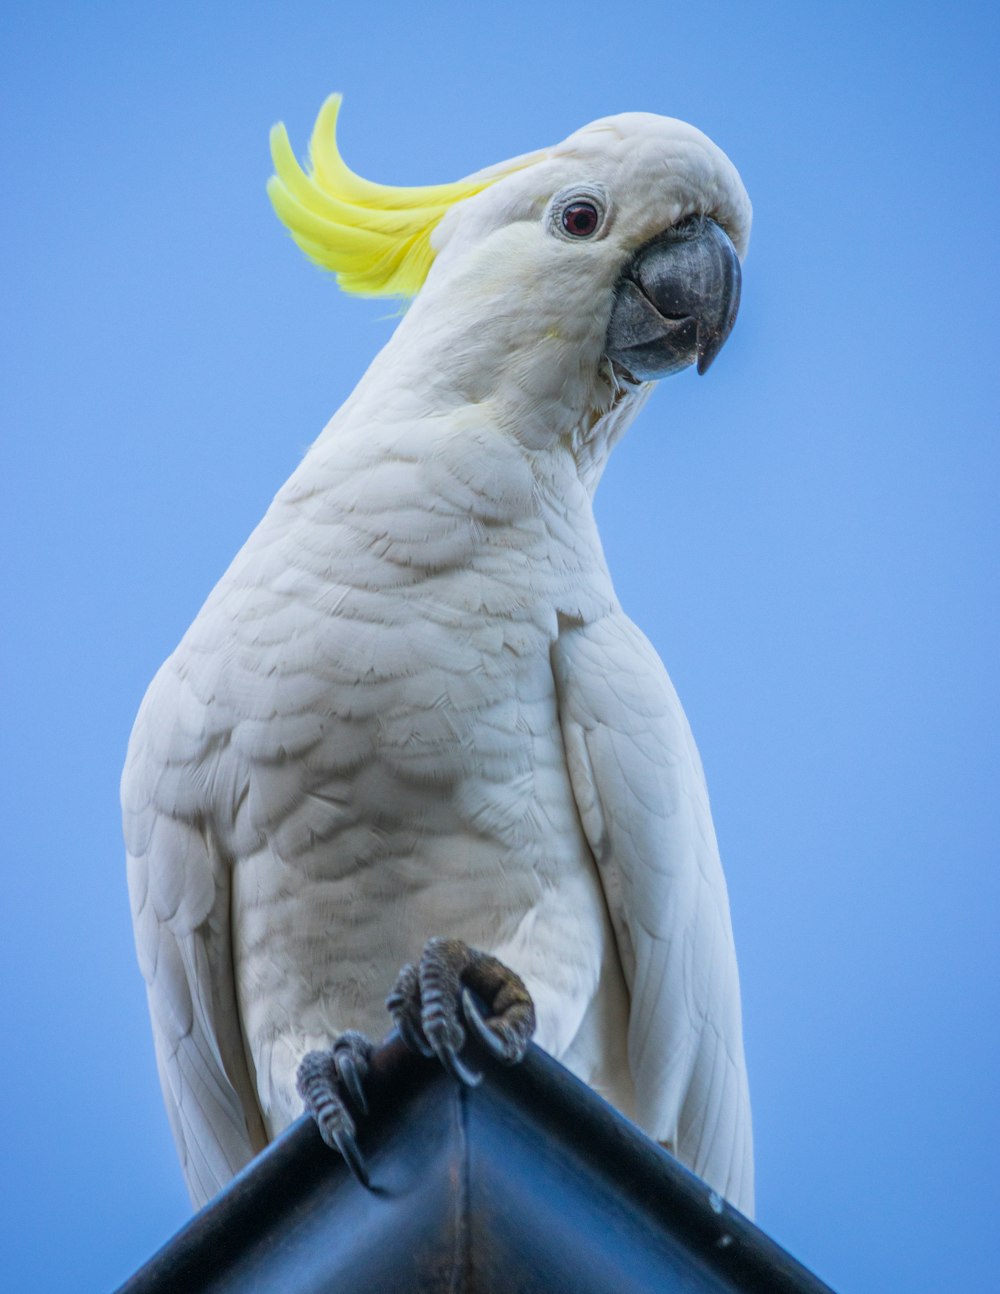 a white bird with a yellow peel on its head